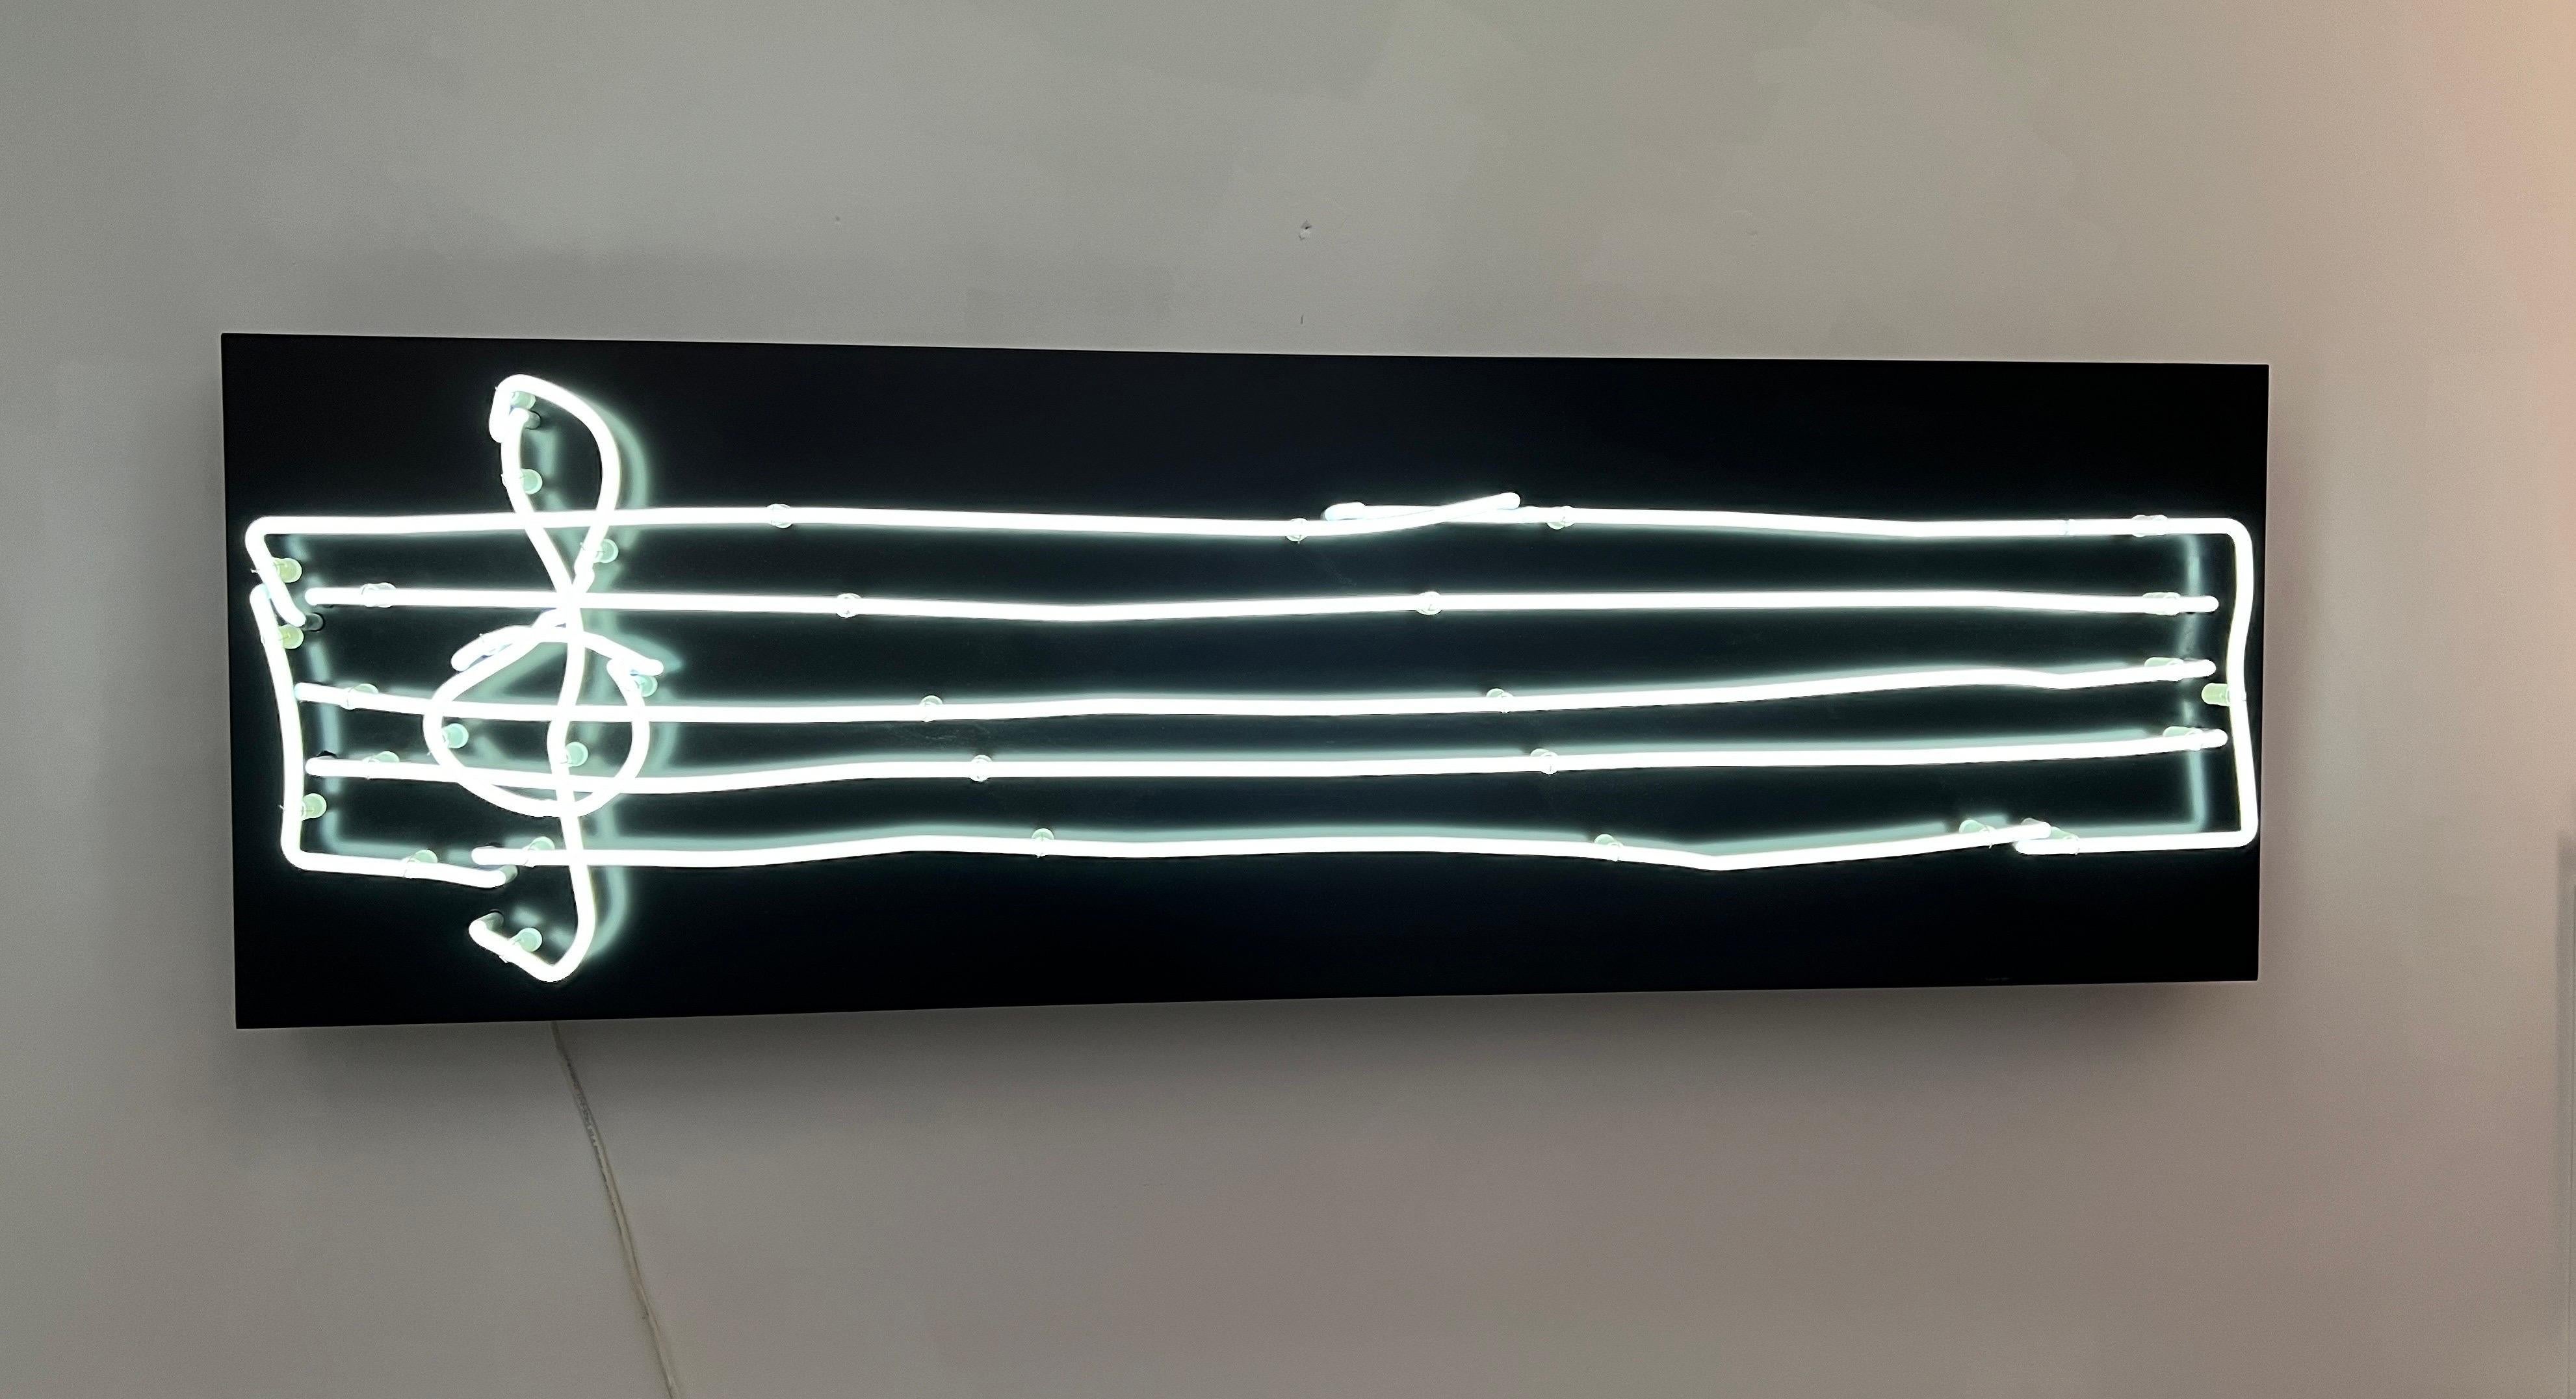 Innoncence, neon sculpture musical  - Mixed Media Art by Fabrice Vignand